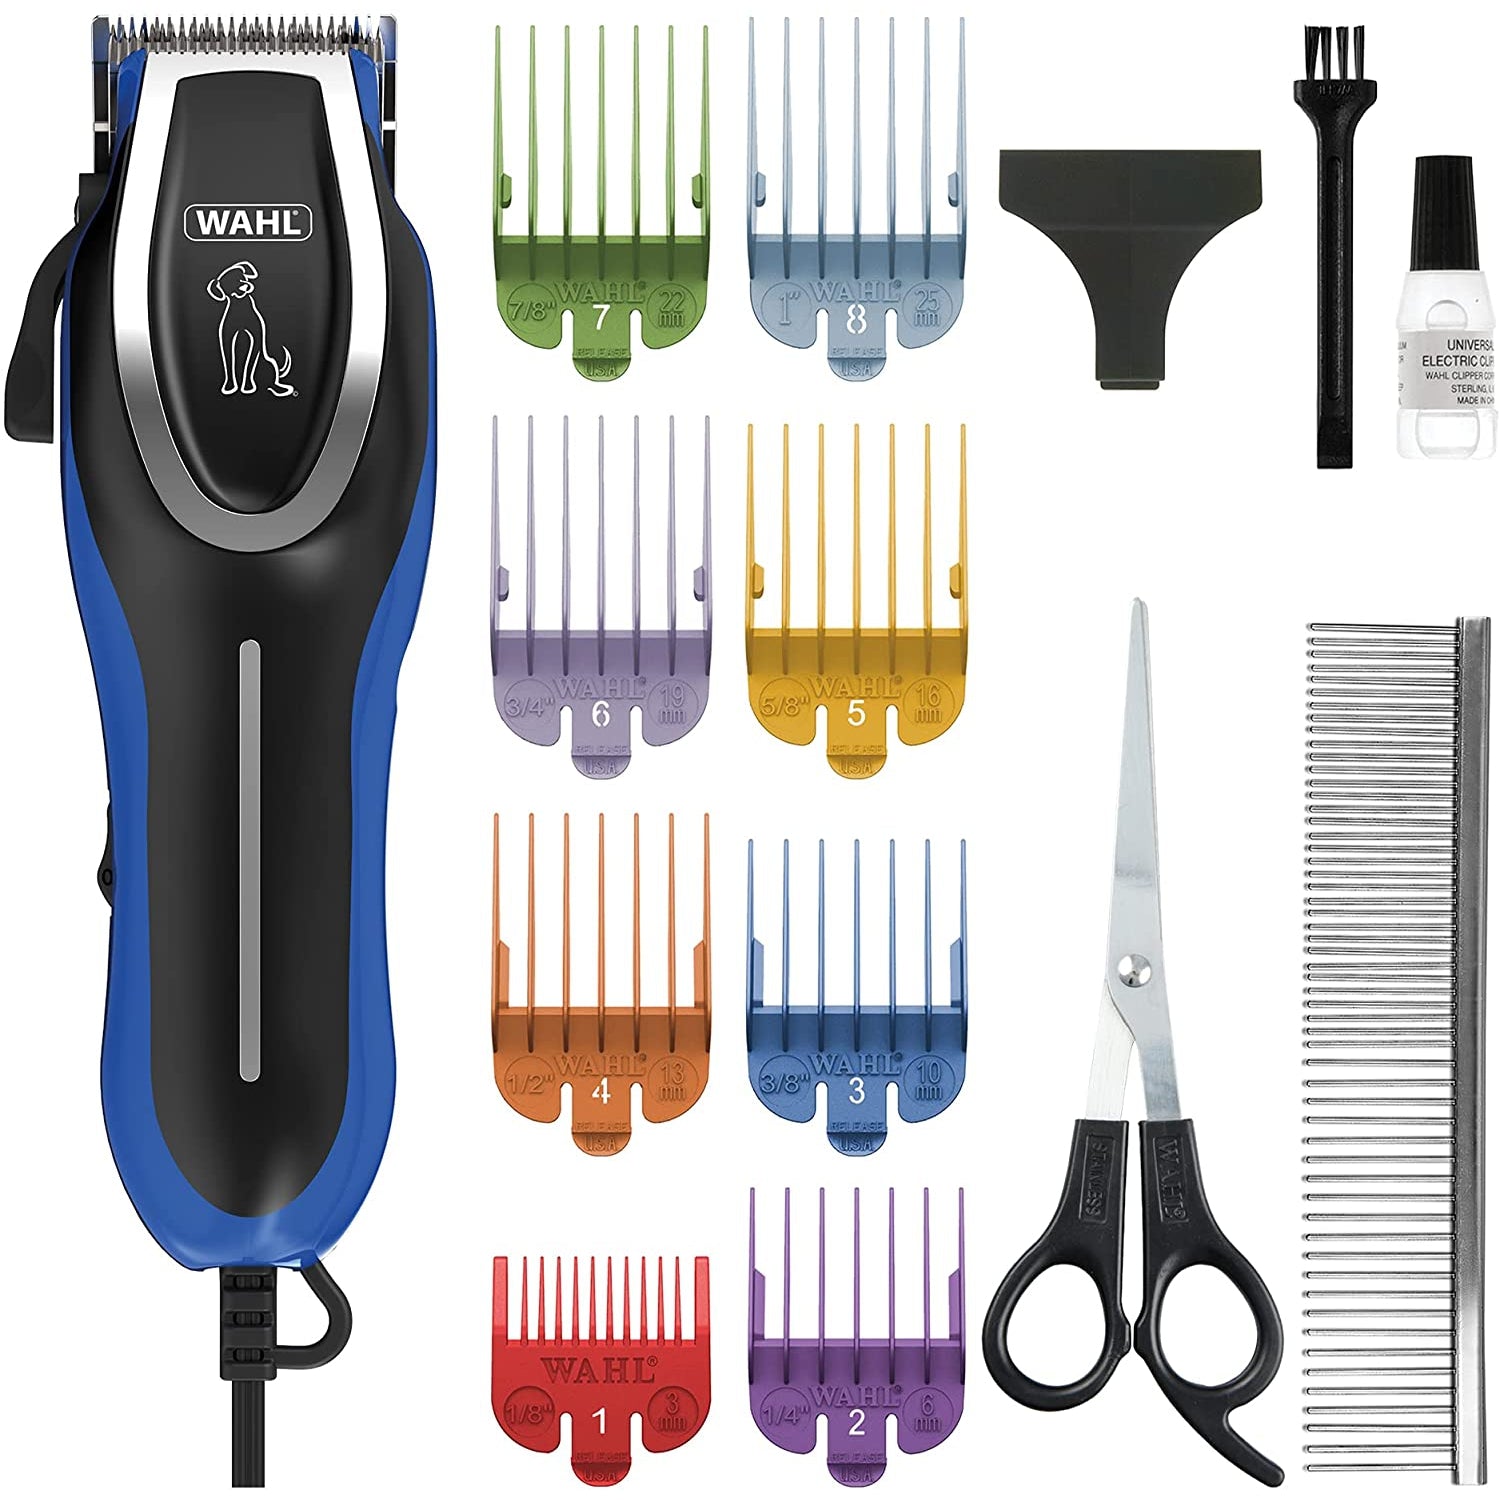 Wahl Pet Clippers, U-Clip Dog Grooming Kit with Colour Coded Combs, Low Noise Corded Pet Clippers, Sharp Cutting Steel Blades